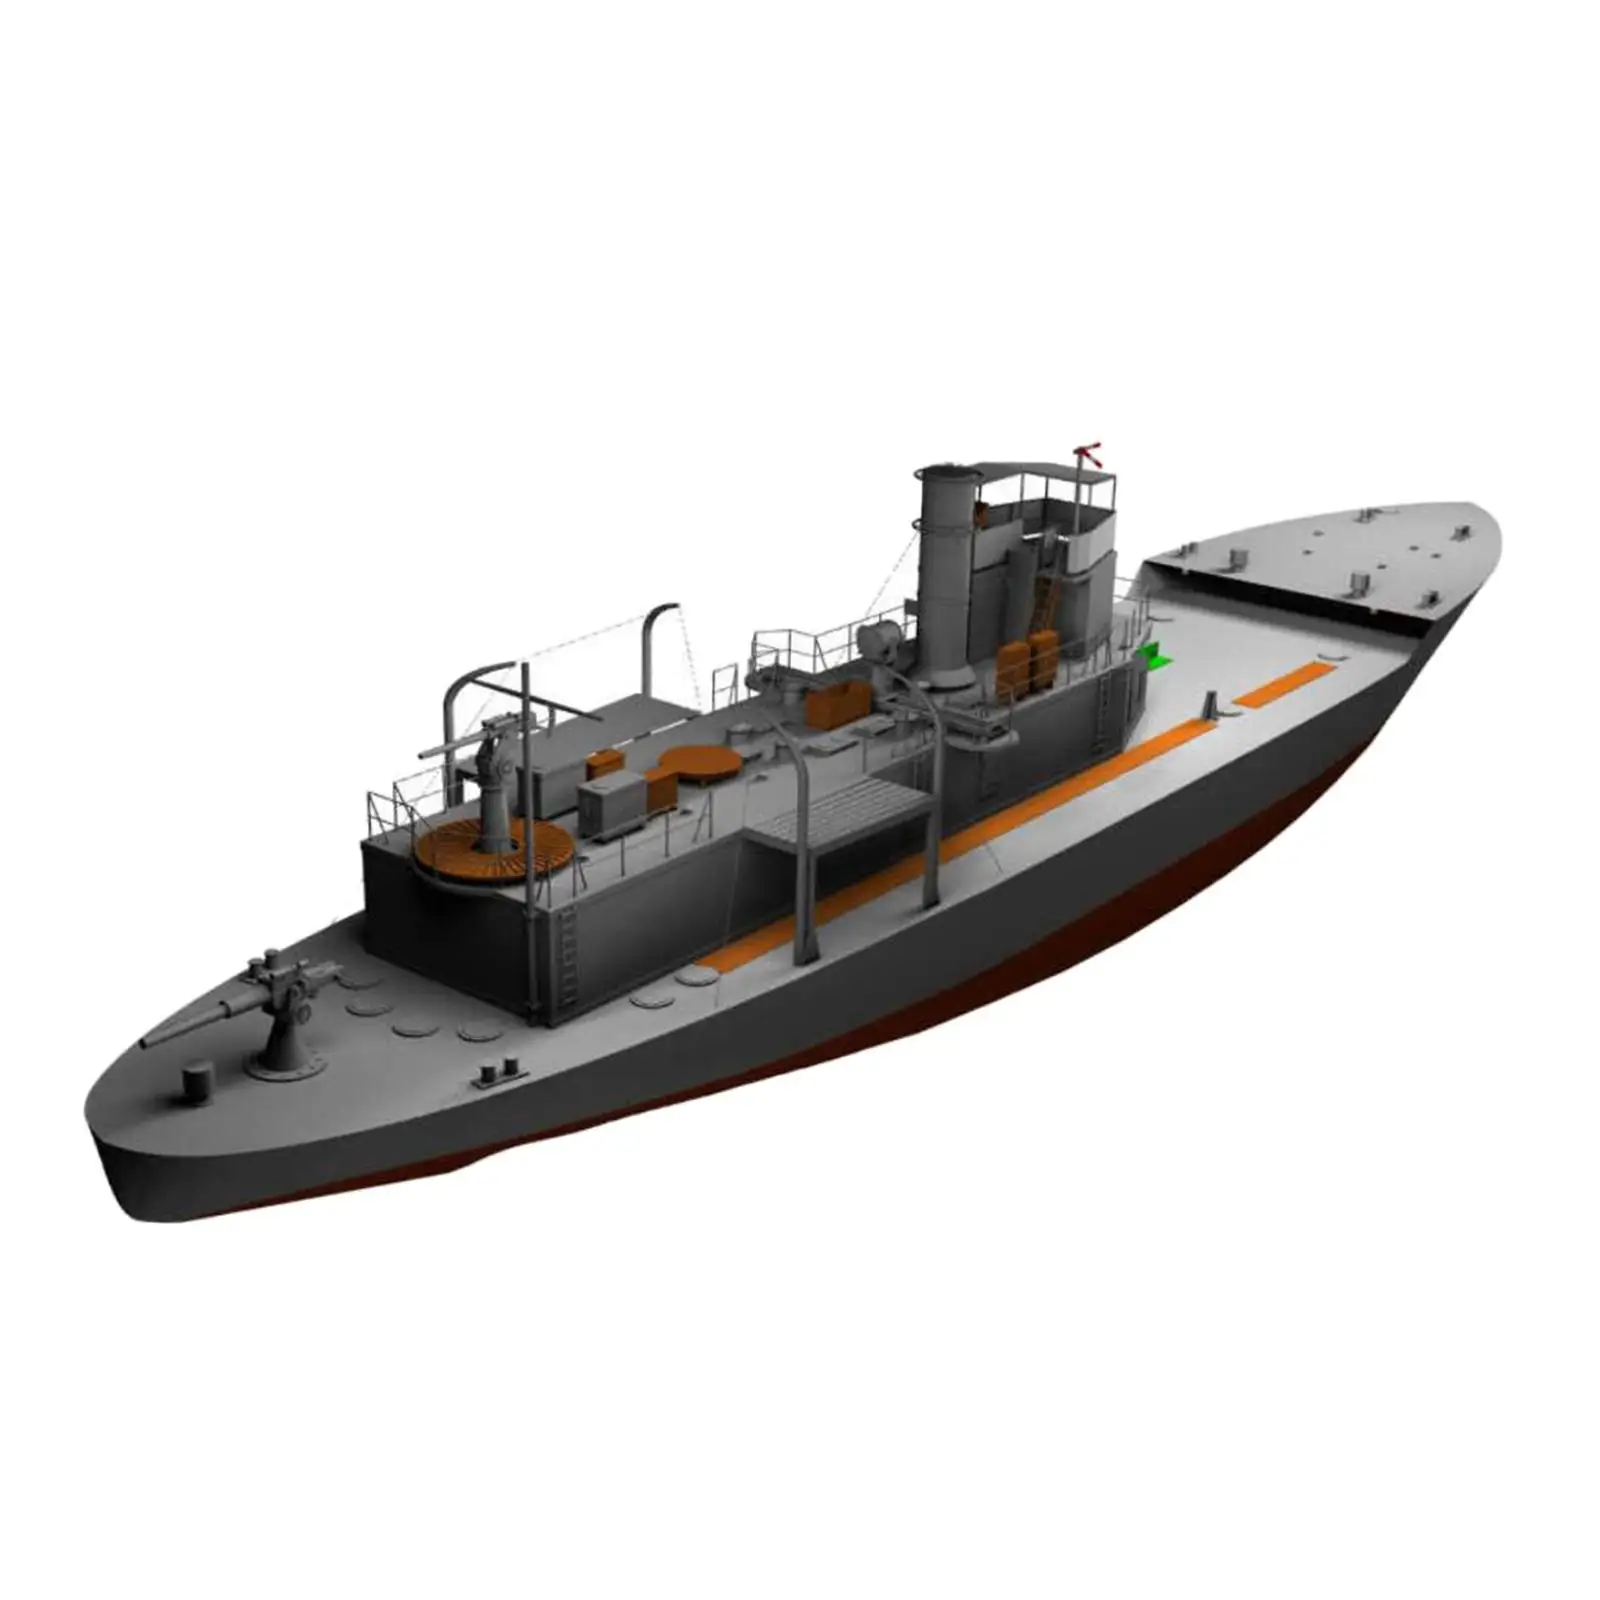 1/100 Patrol Boat Kits Papercraft DIY Assemble Toy for Adults Kids Children